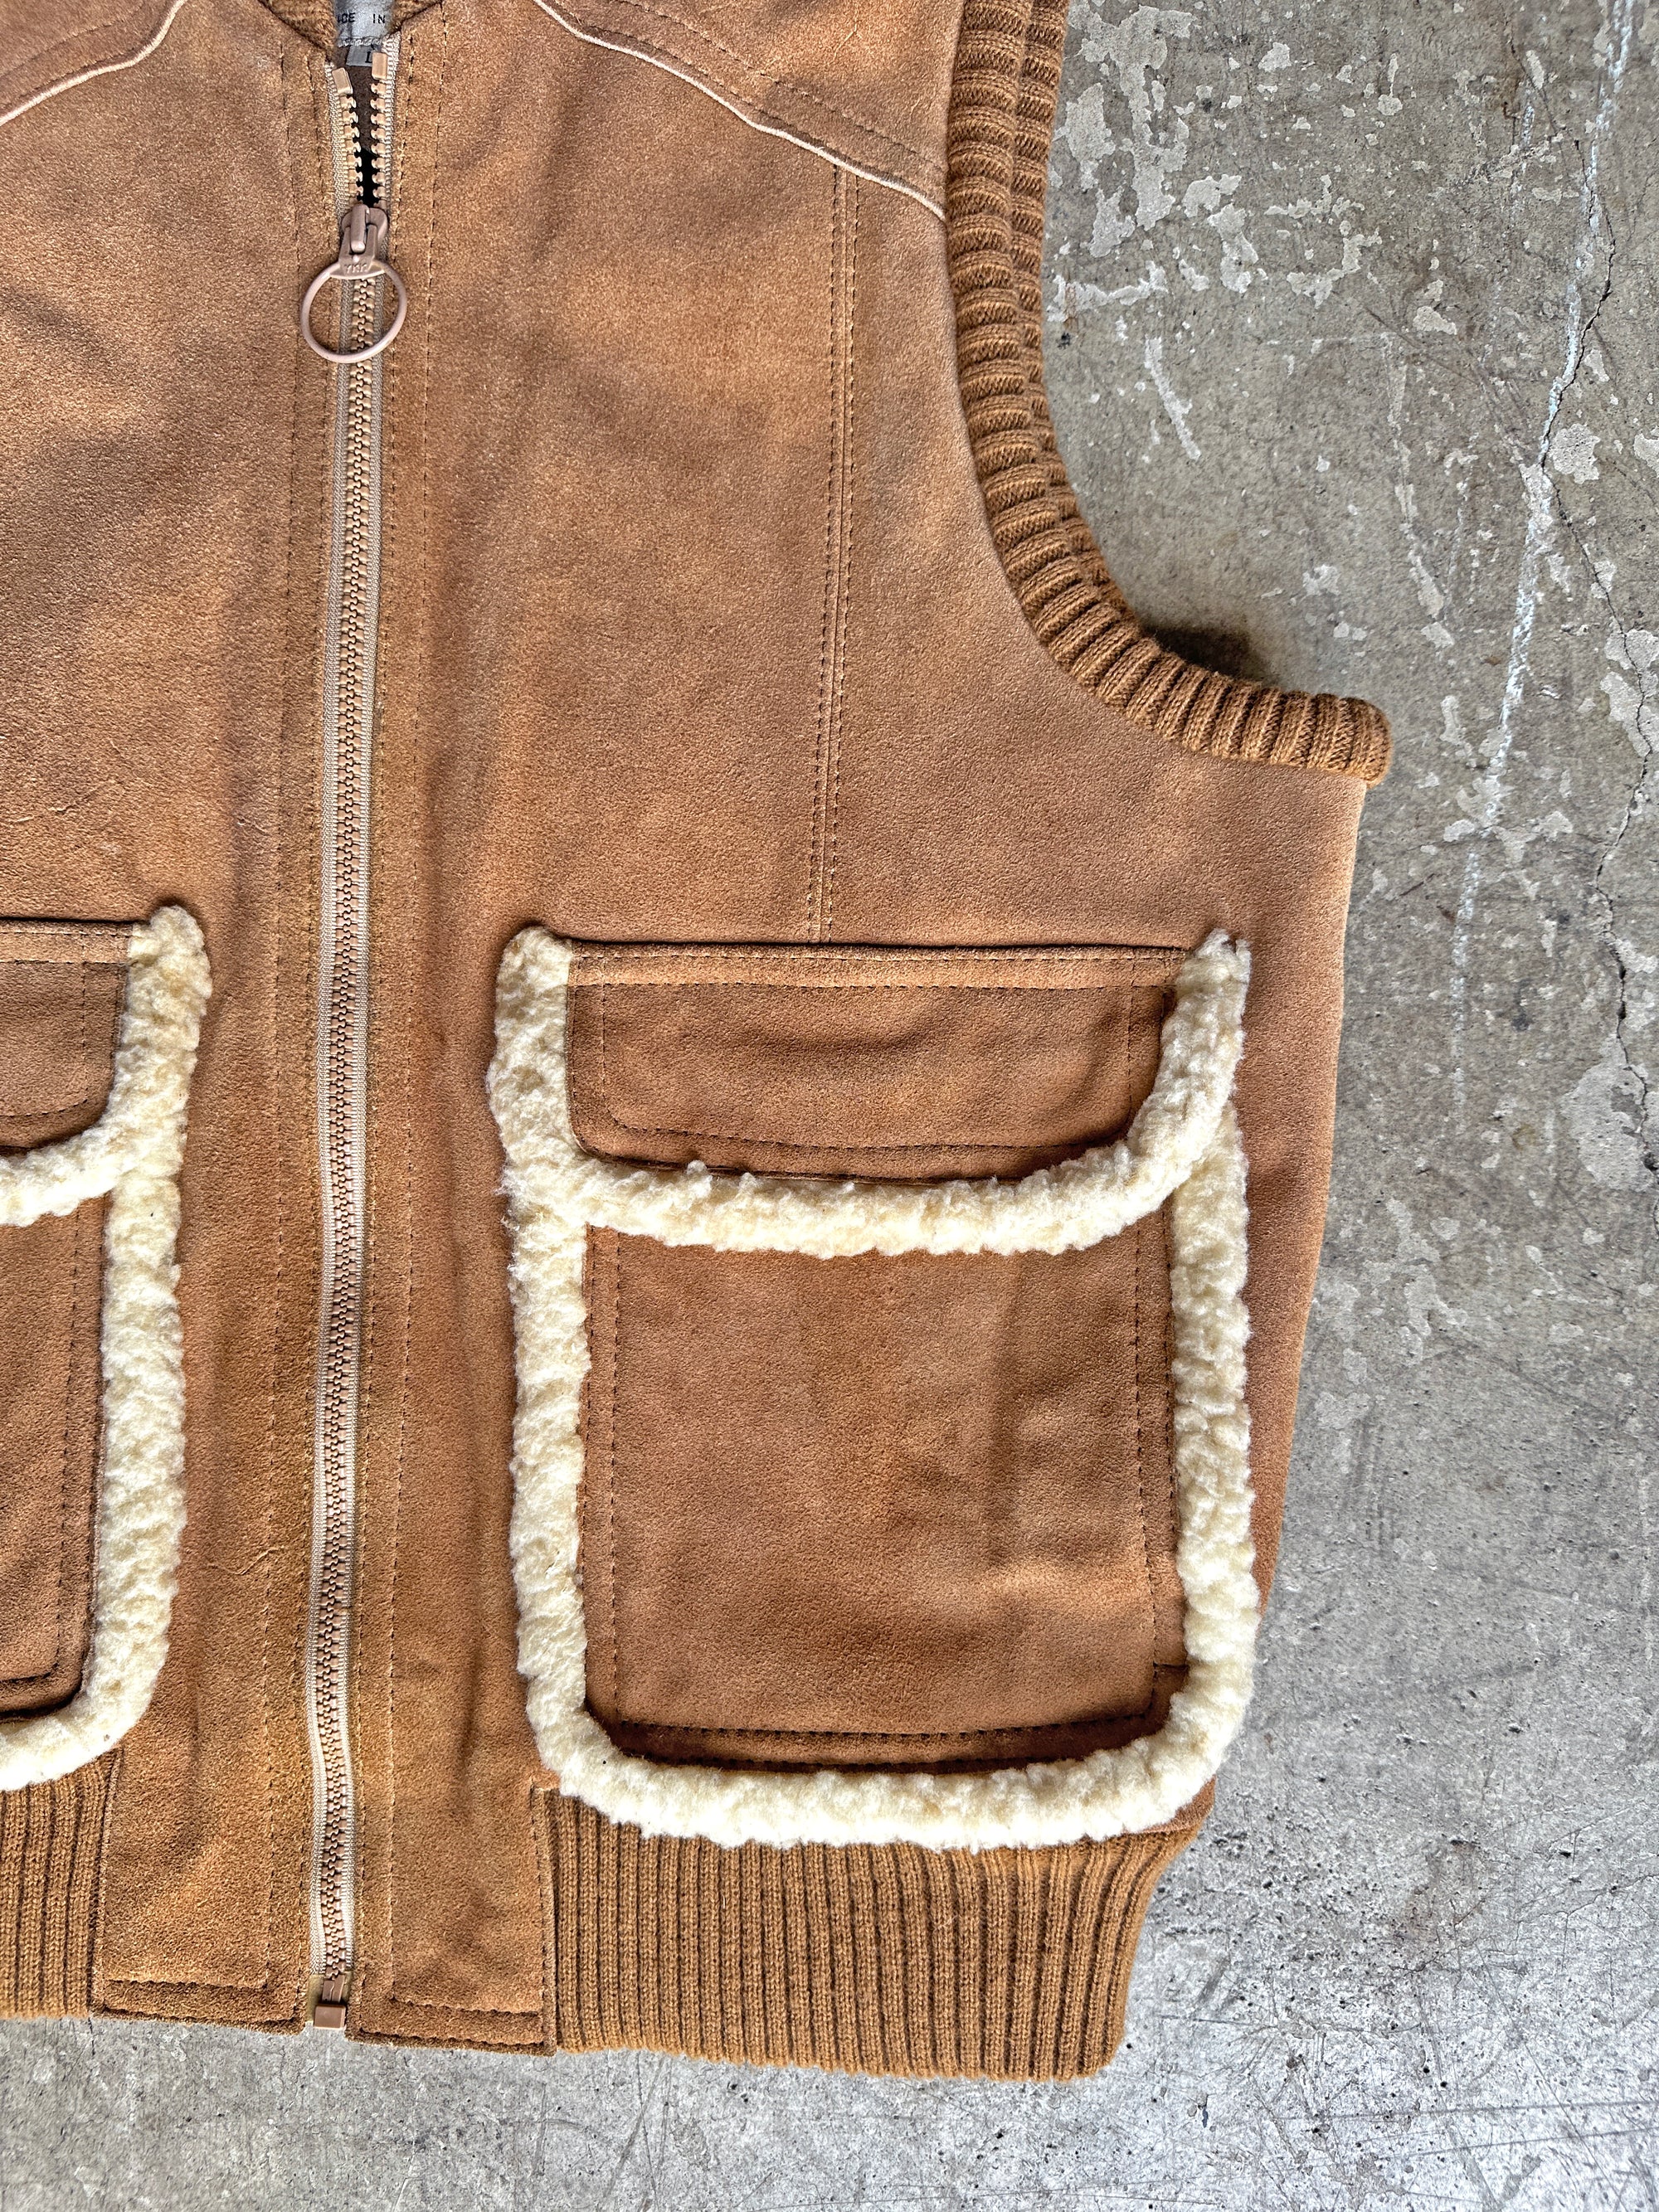 1970s Suede Vest with Shearling Lined Pockets